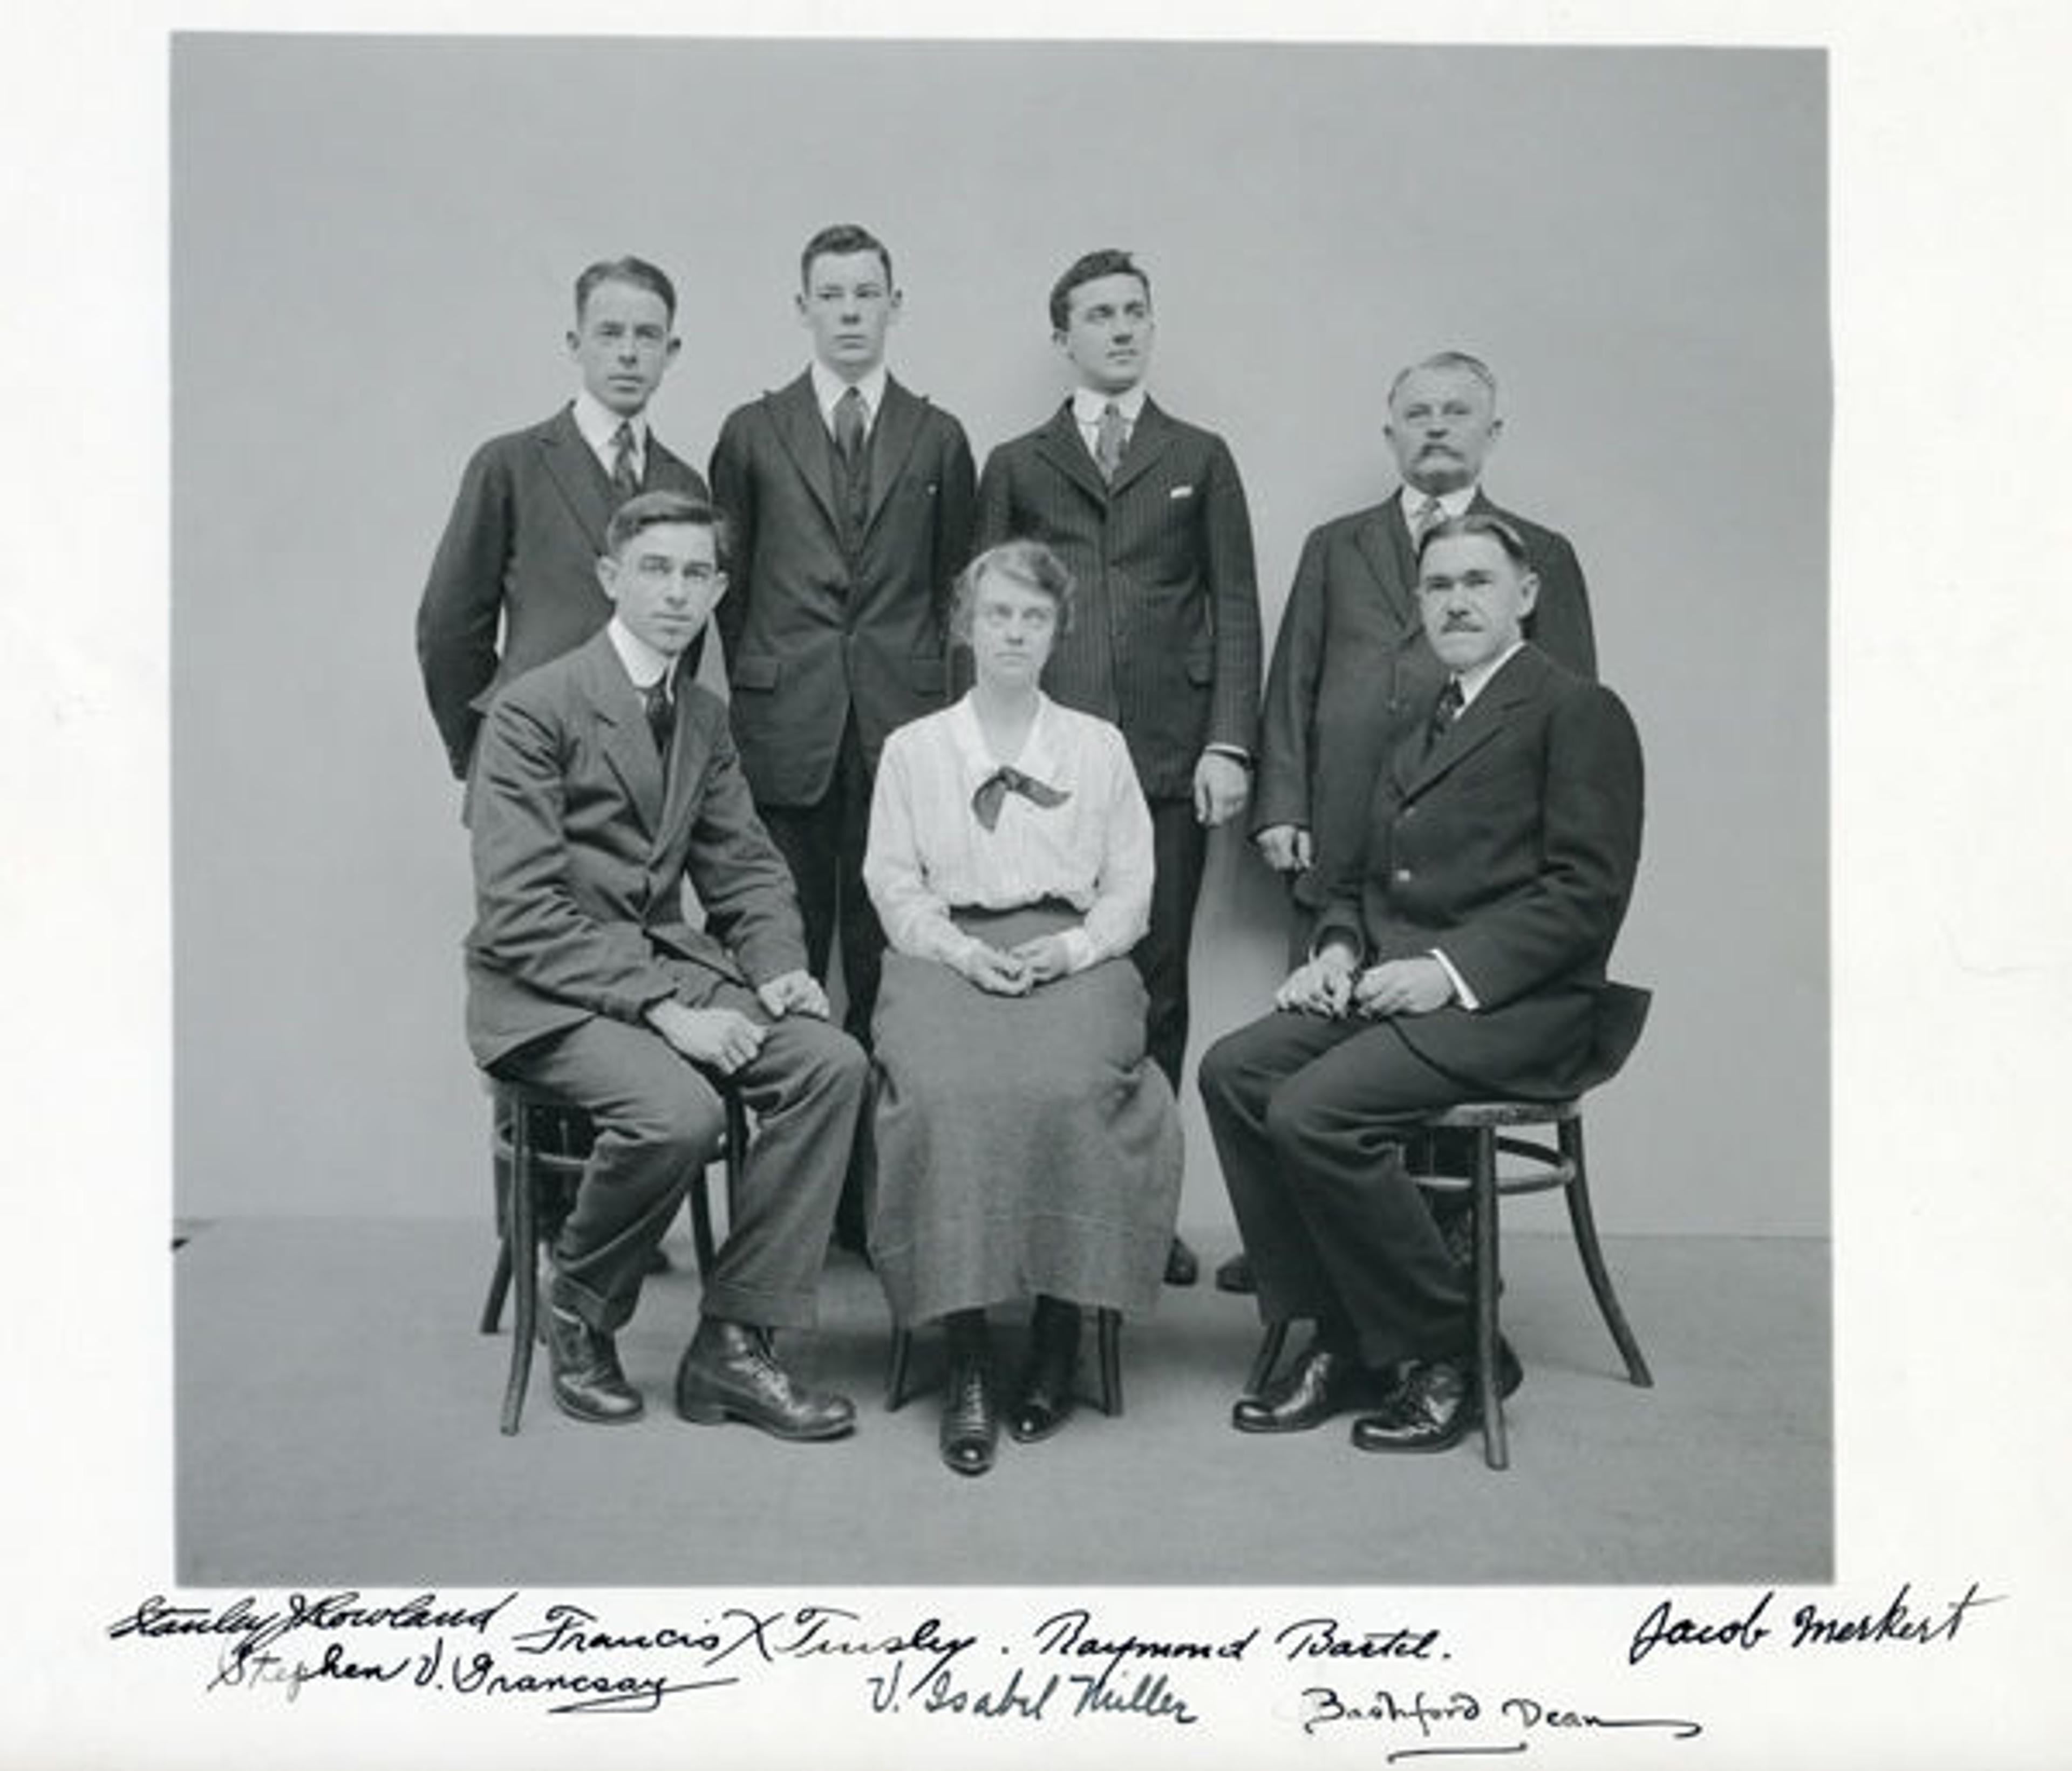 Dean and the staff of the Department of Arms and Armor in 1919